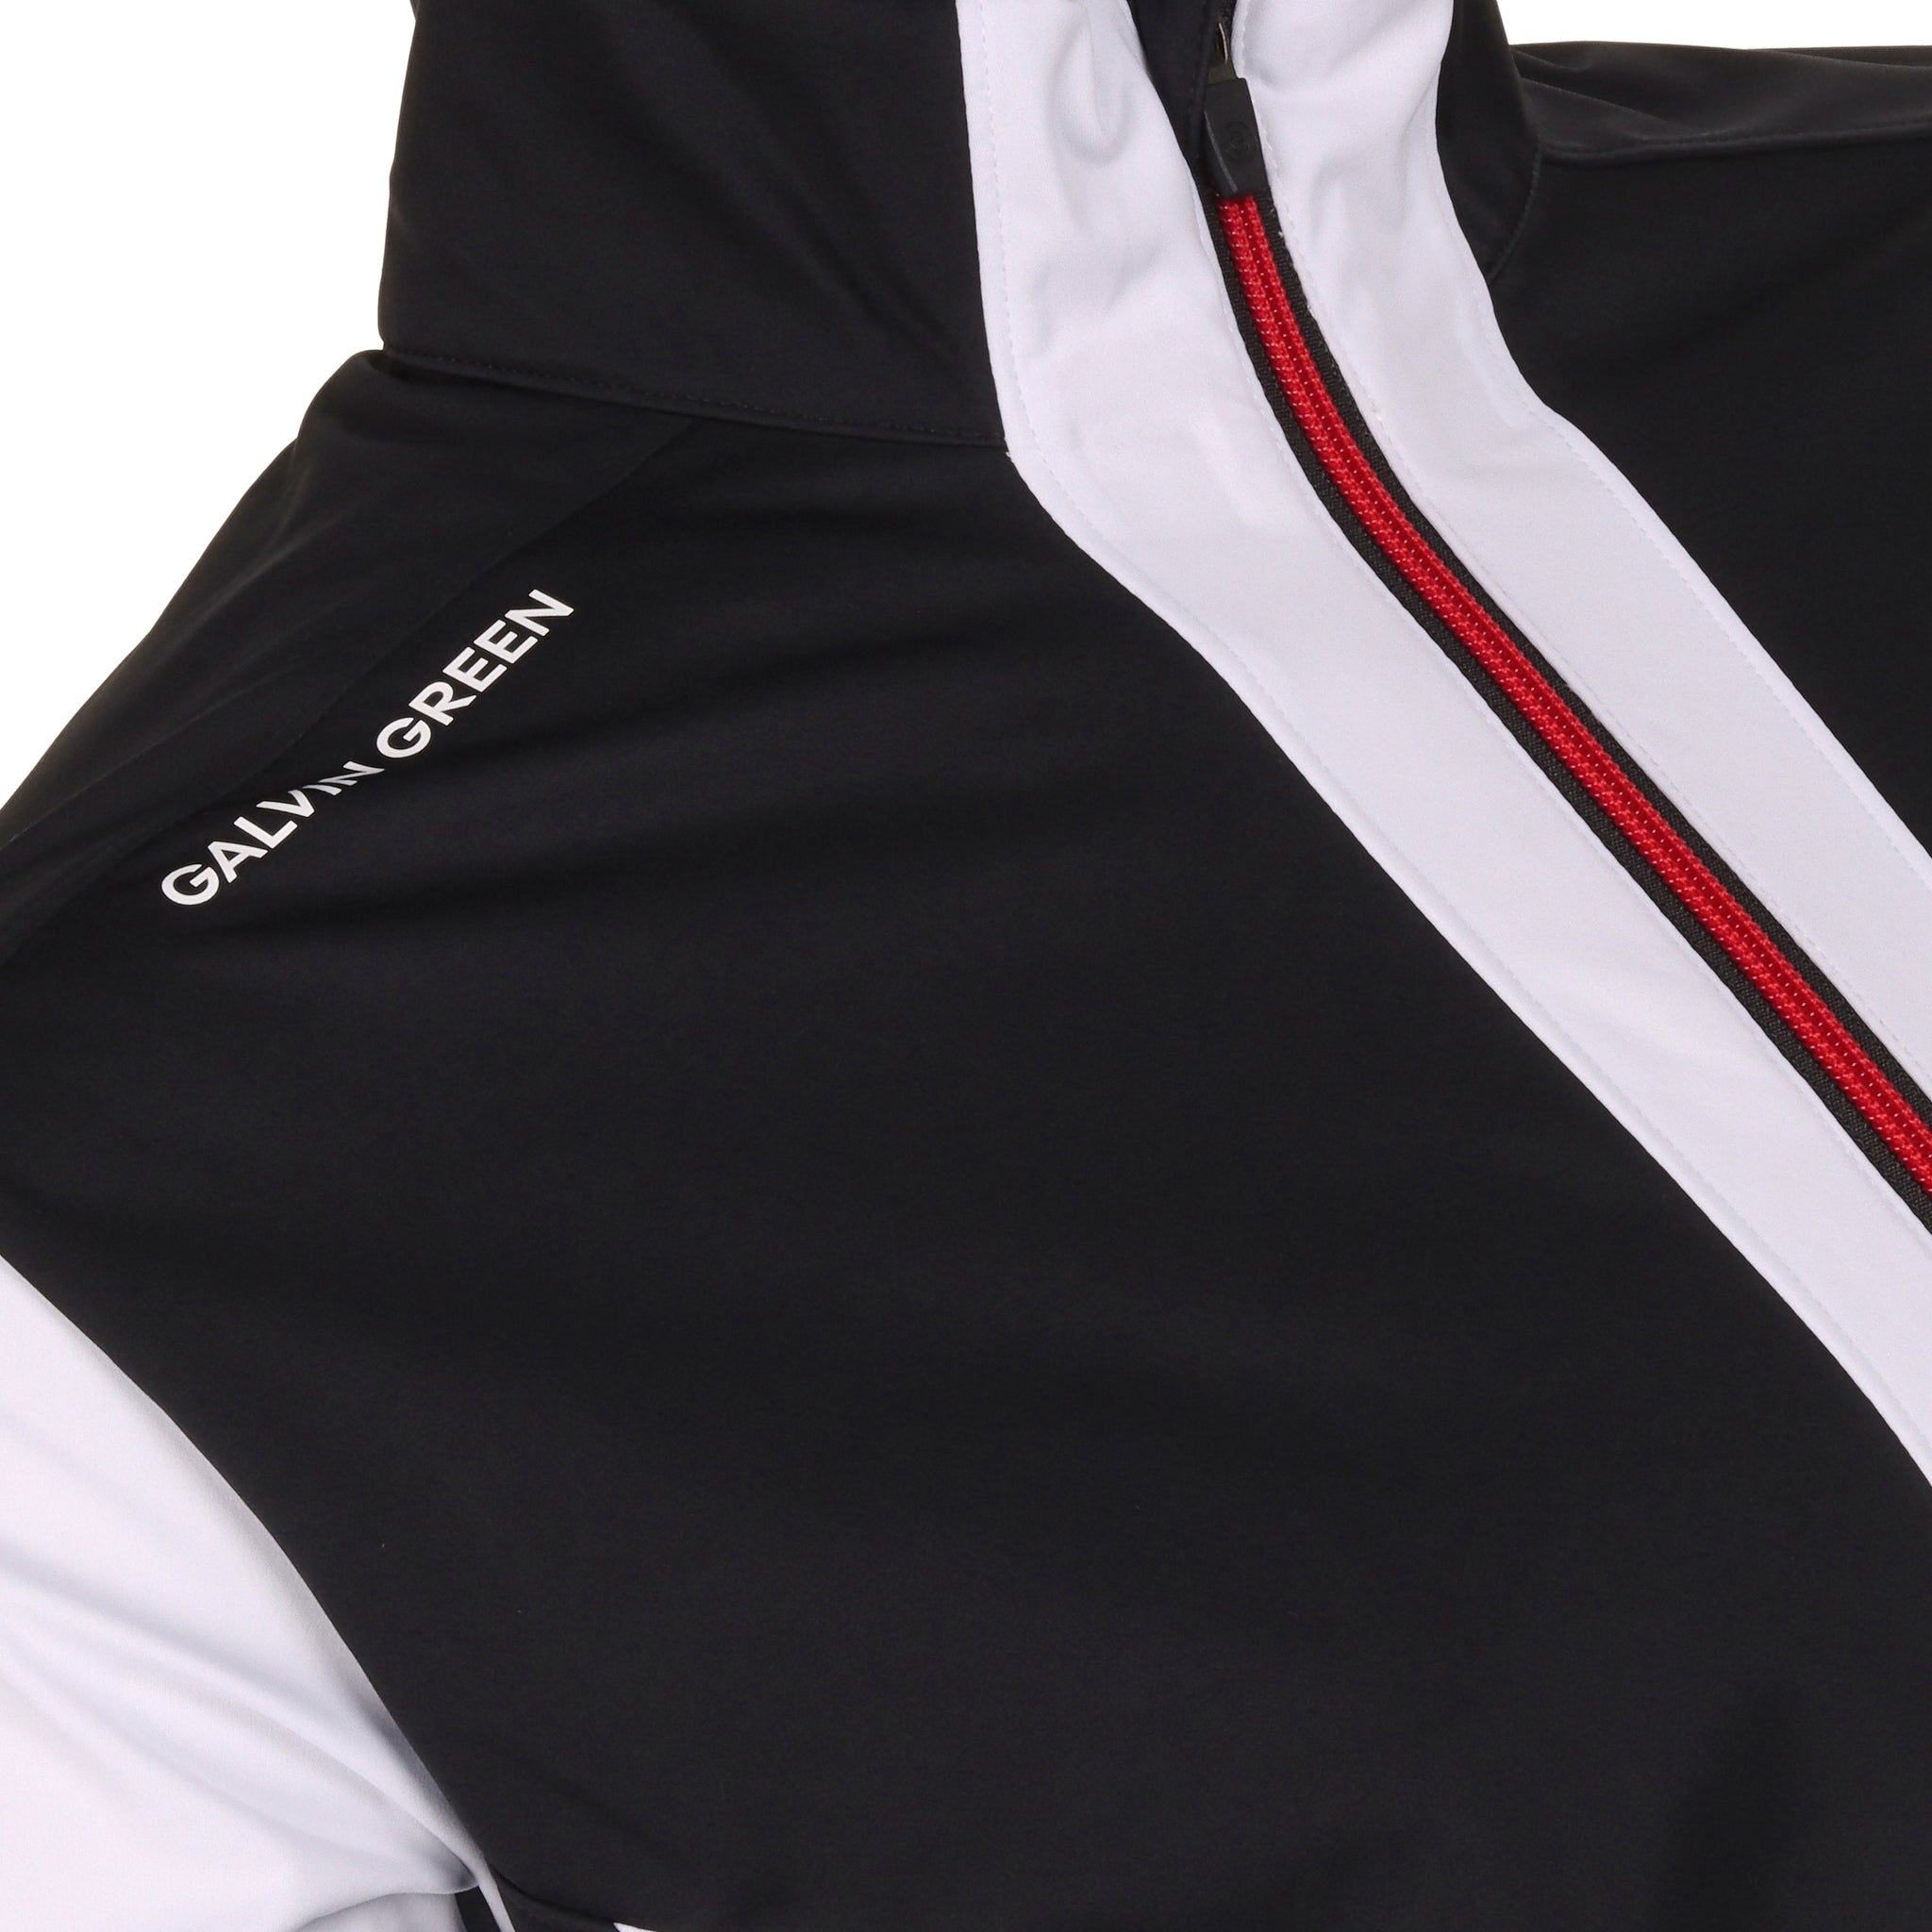 galvin-green-lawrence-interface-1-golf-jacket-white-black-red-9995